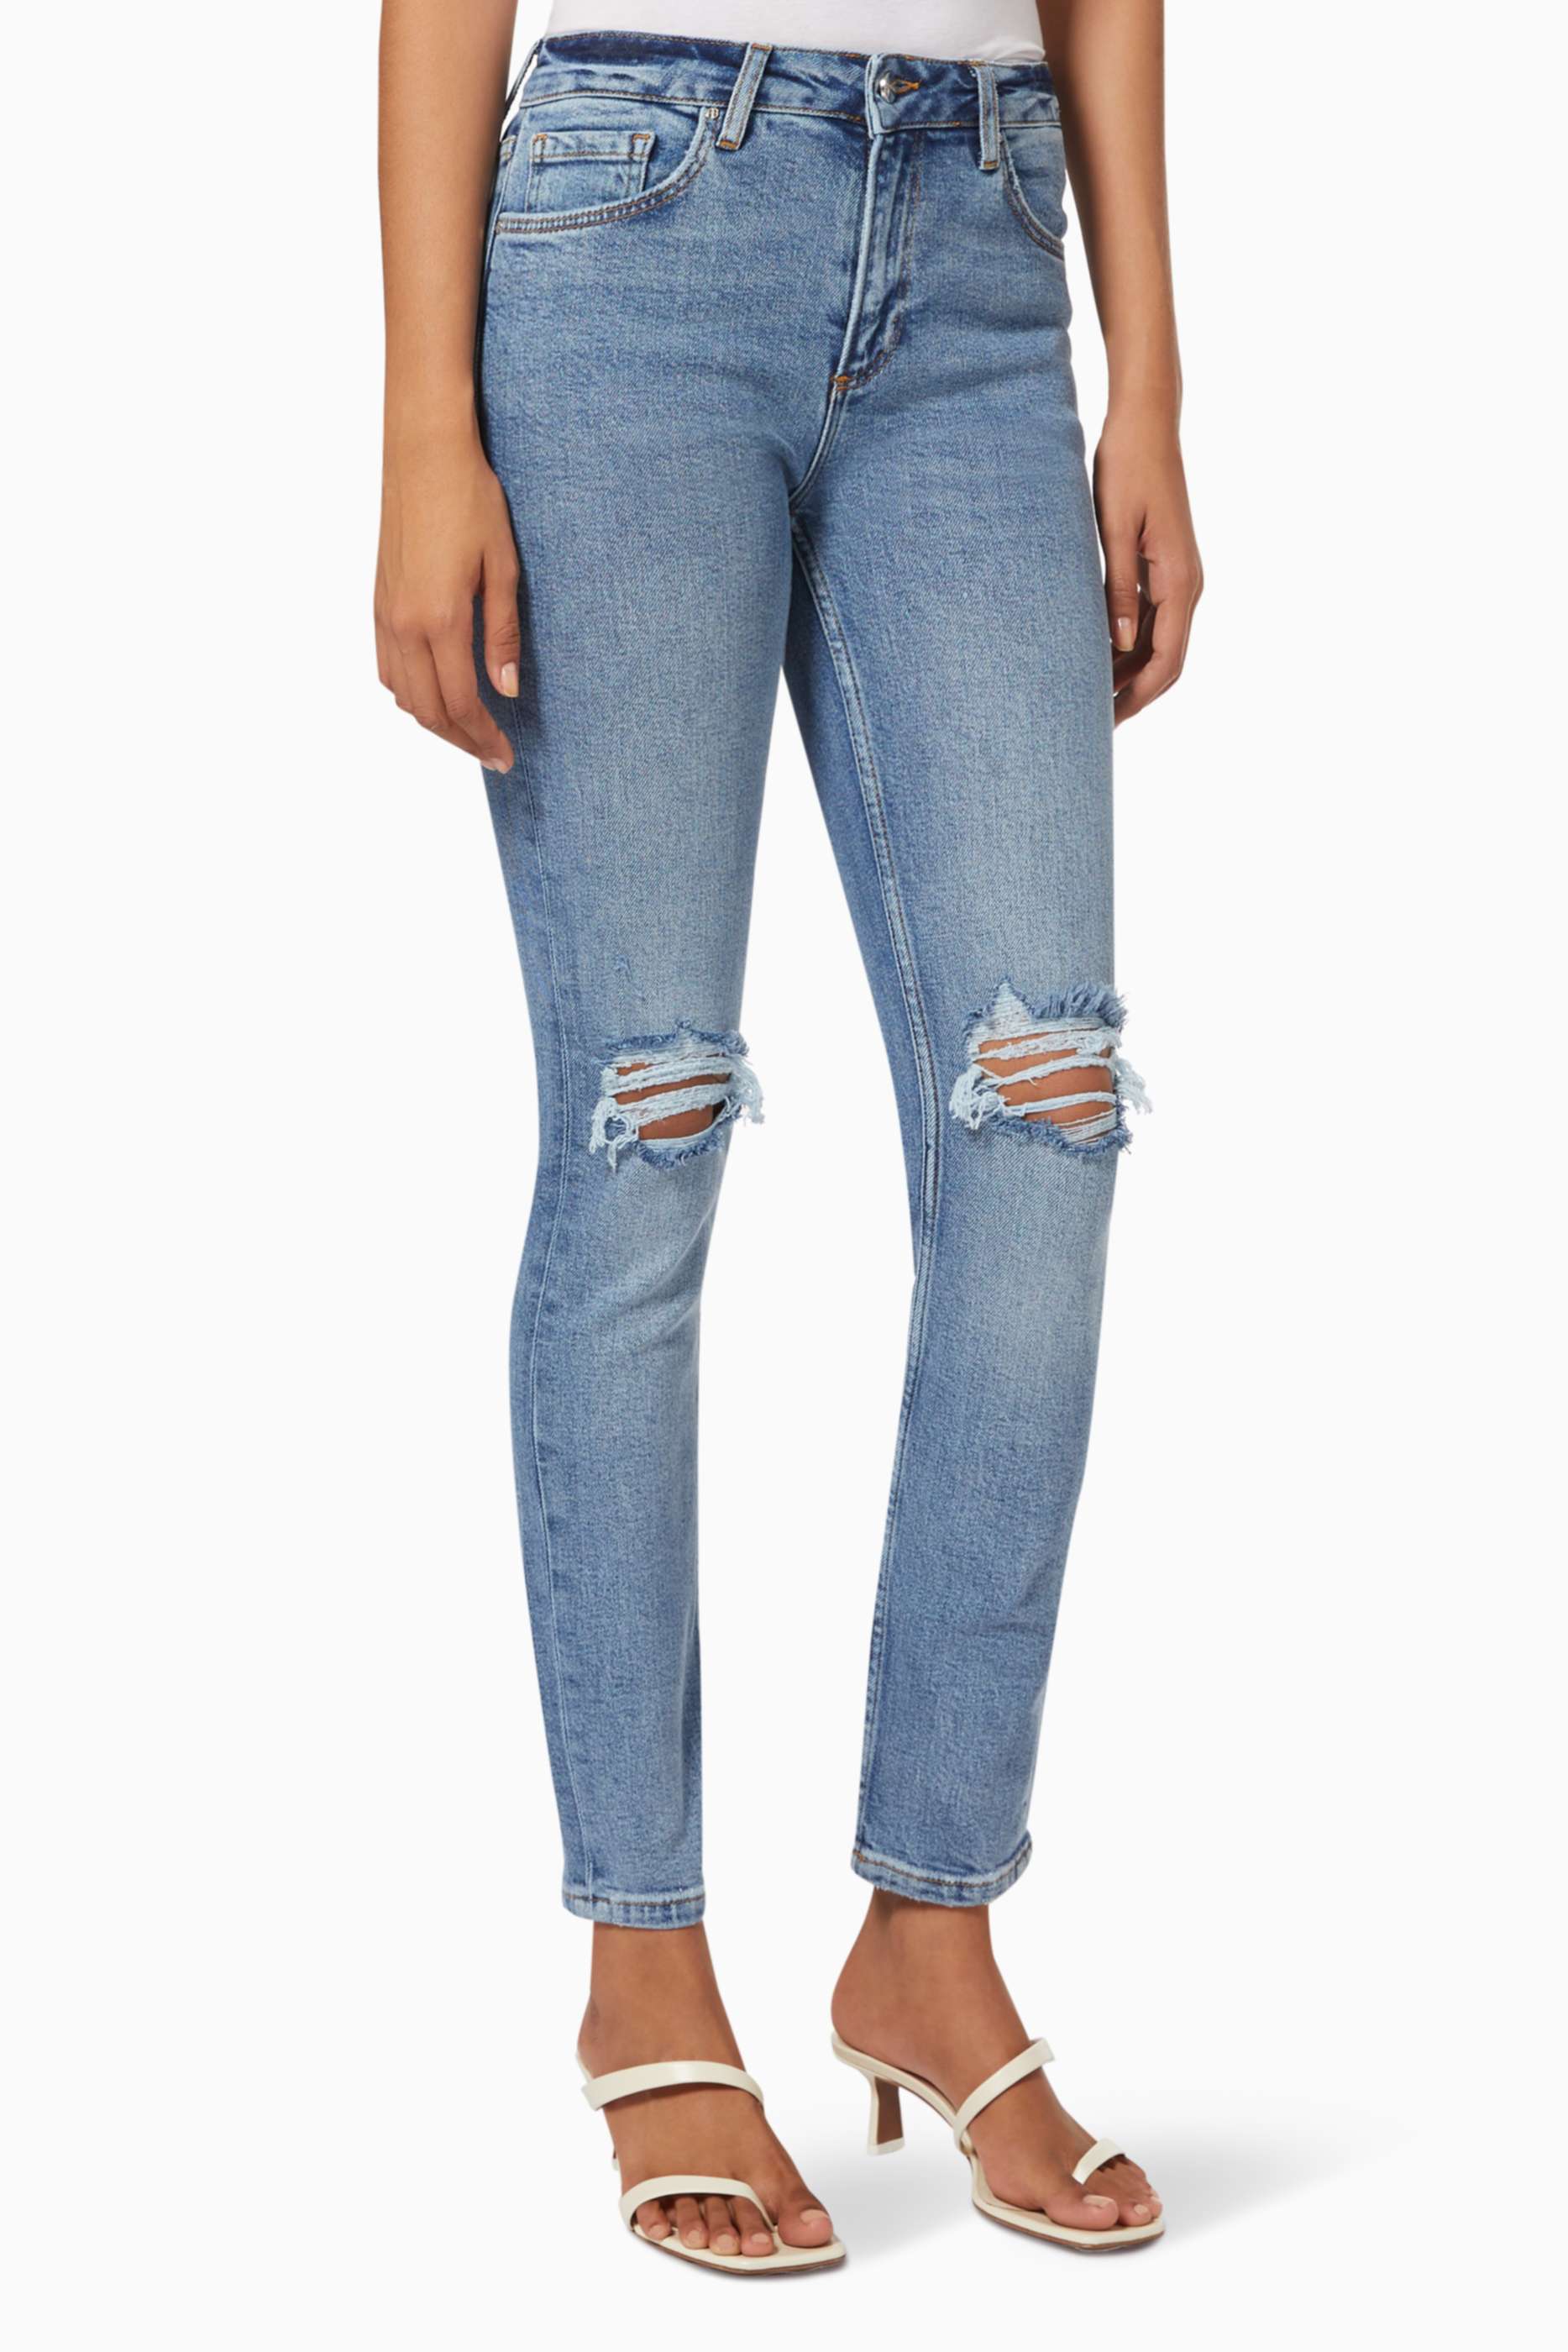 GRLFRND Karolina High-Rise Distressed Skinny Jeans in Ball of Confusion